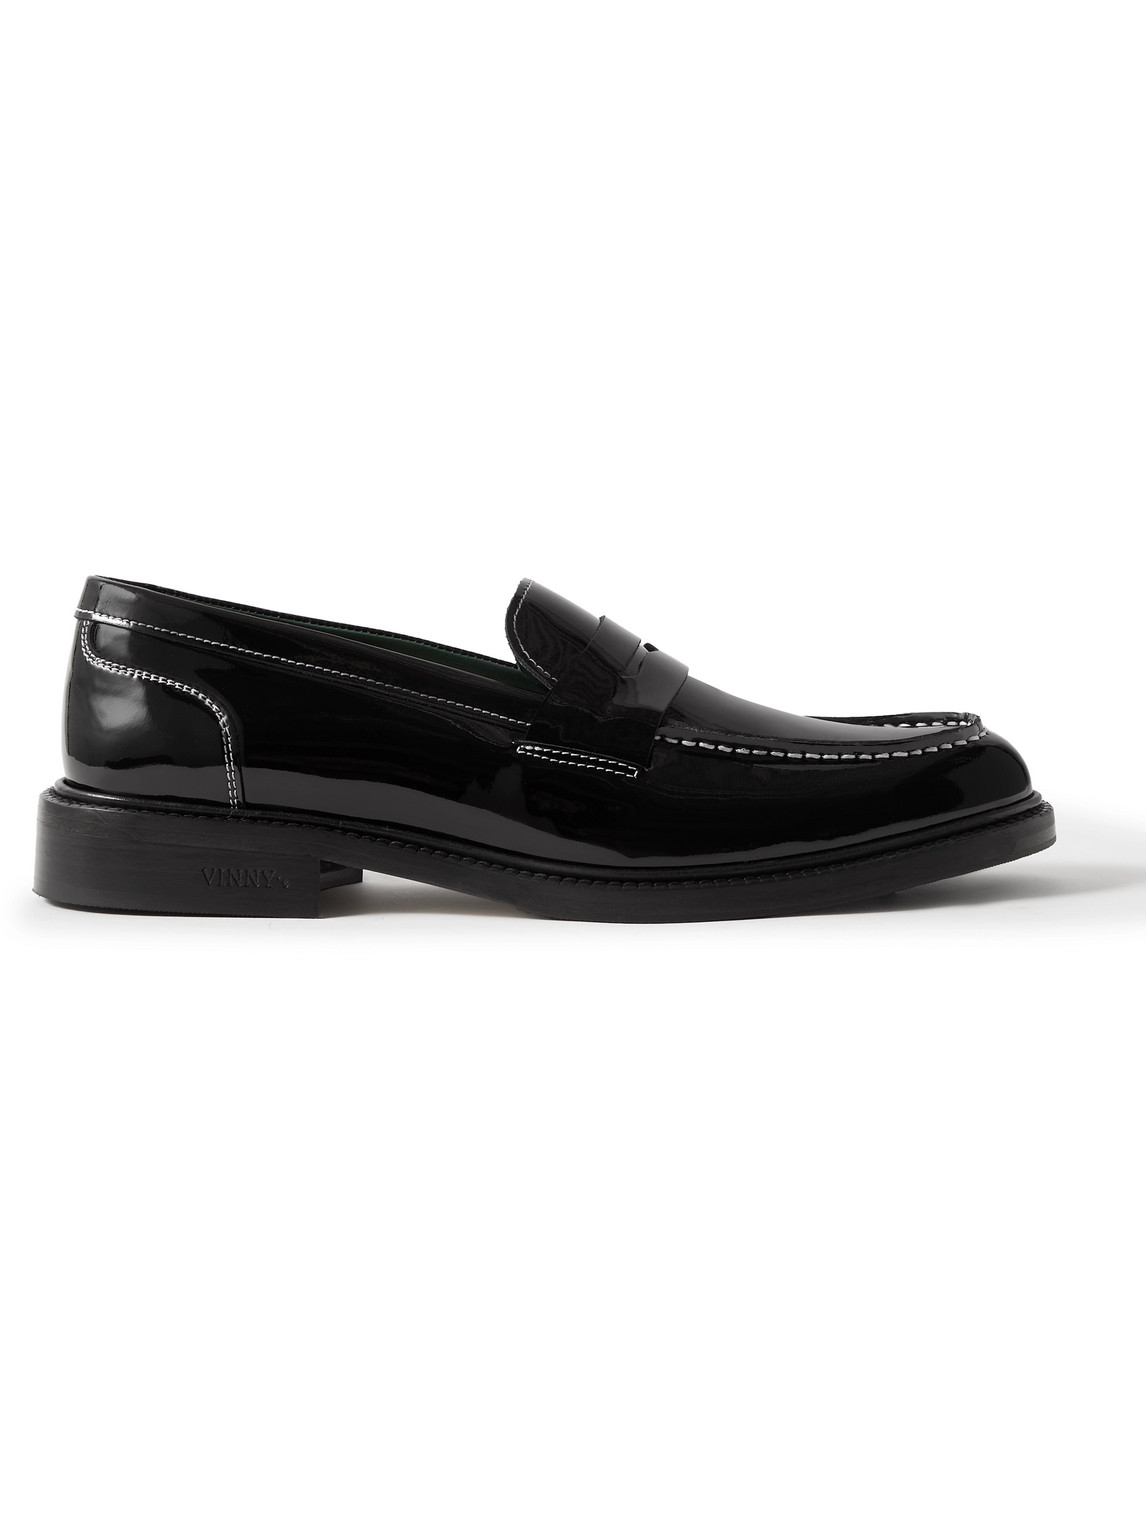 Townee Patent-Leather Penny Loafers